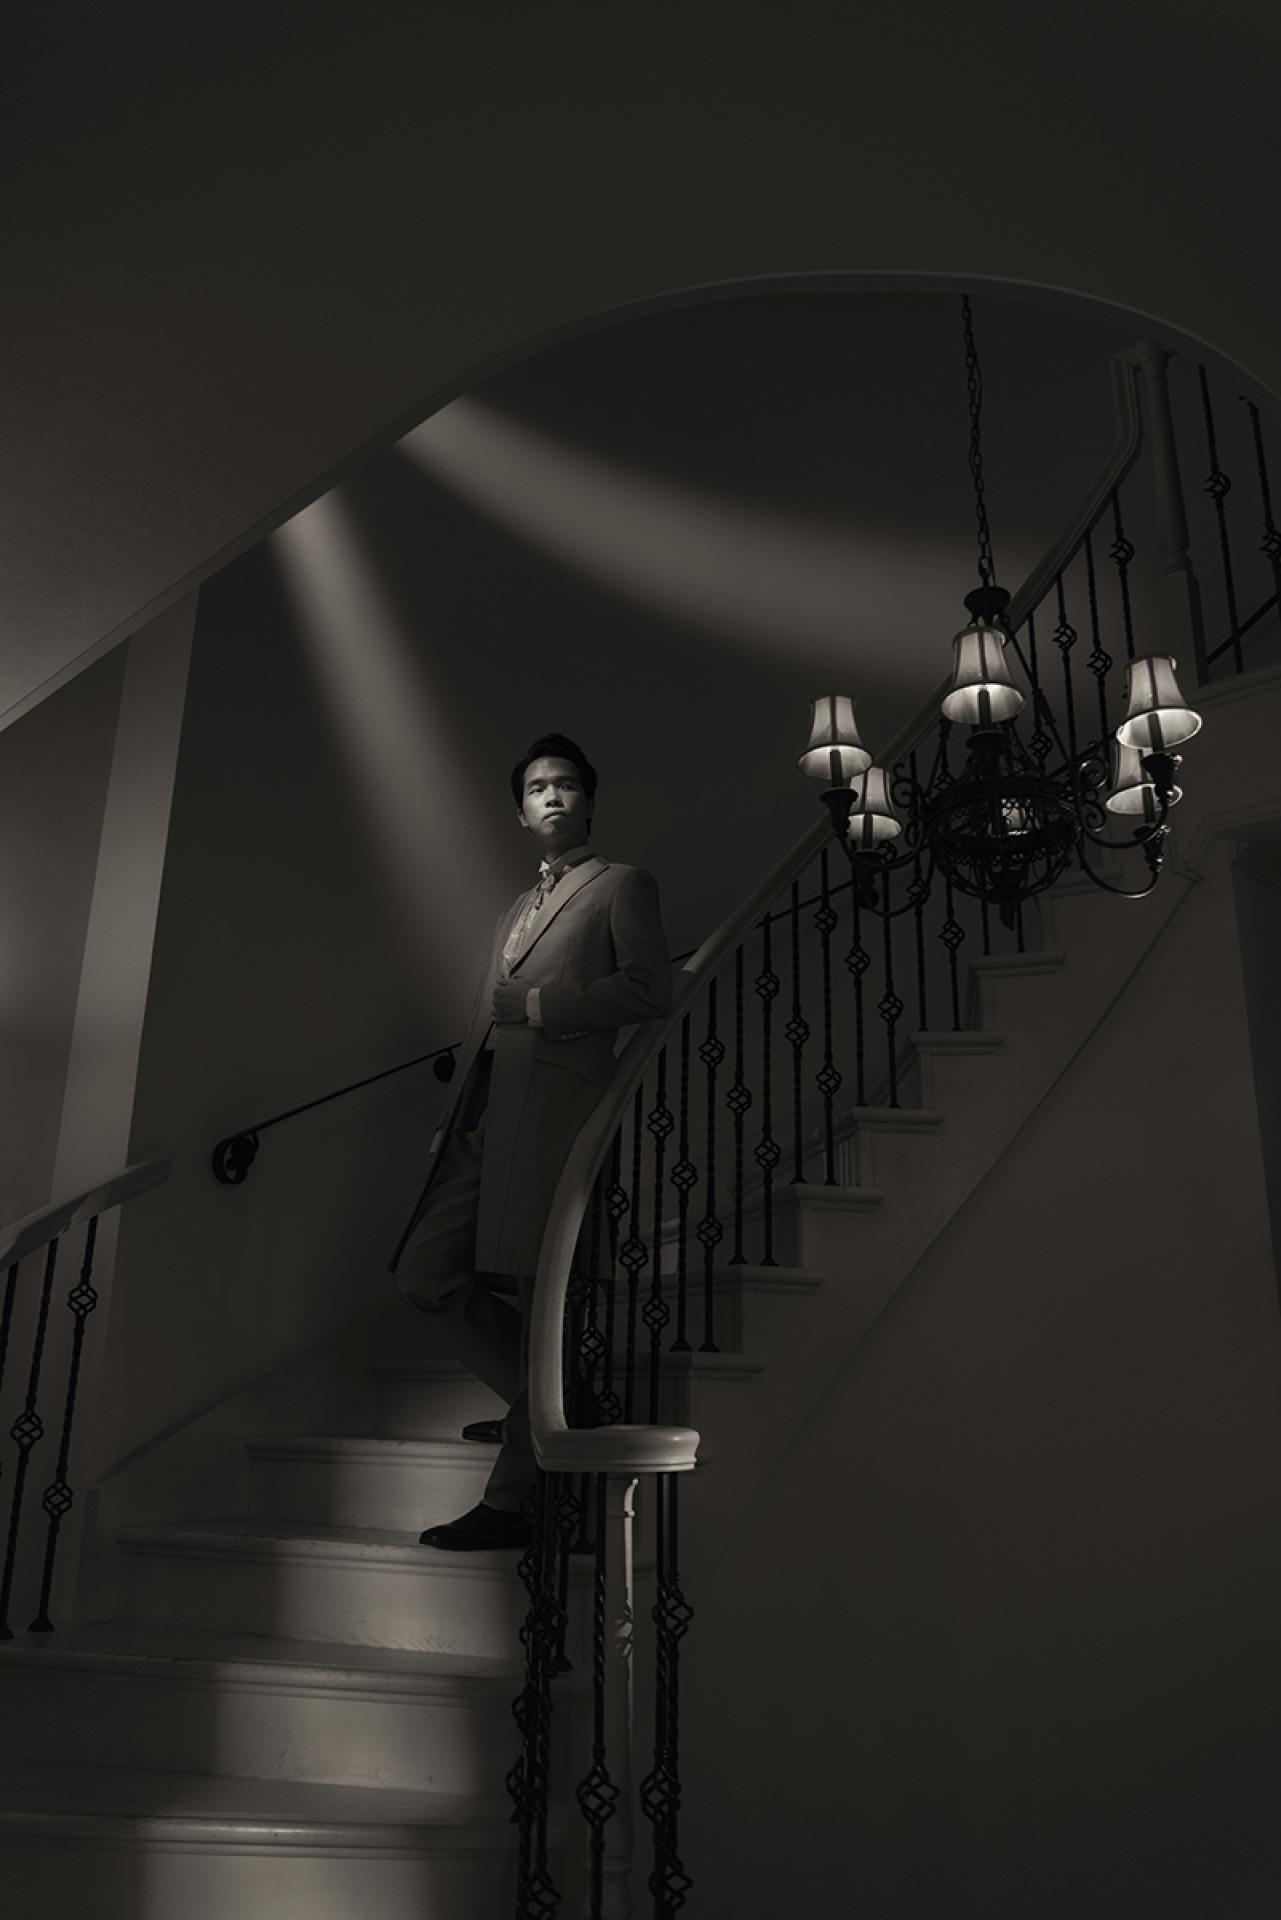 London Photography Awards Winner - Gentlemen and Spiral Staircase